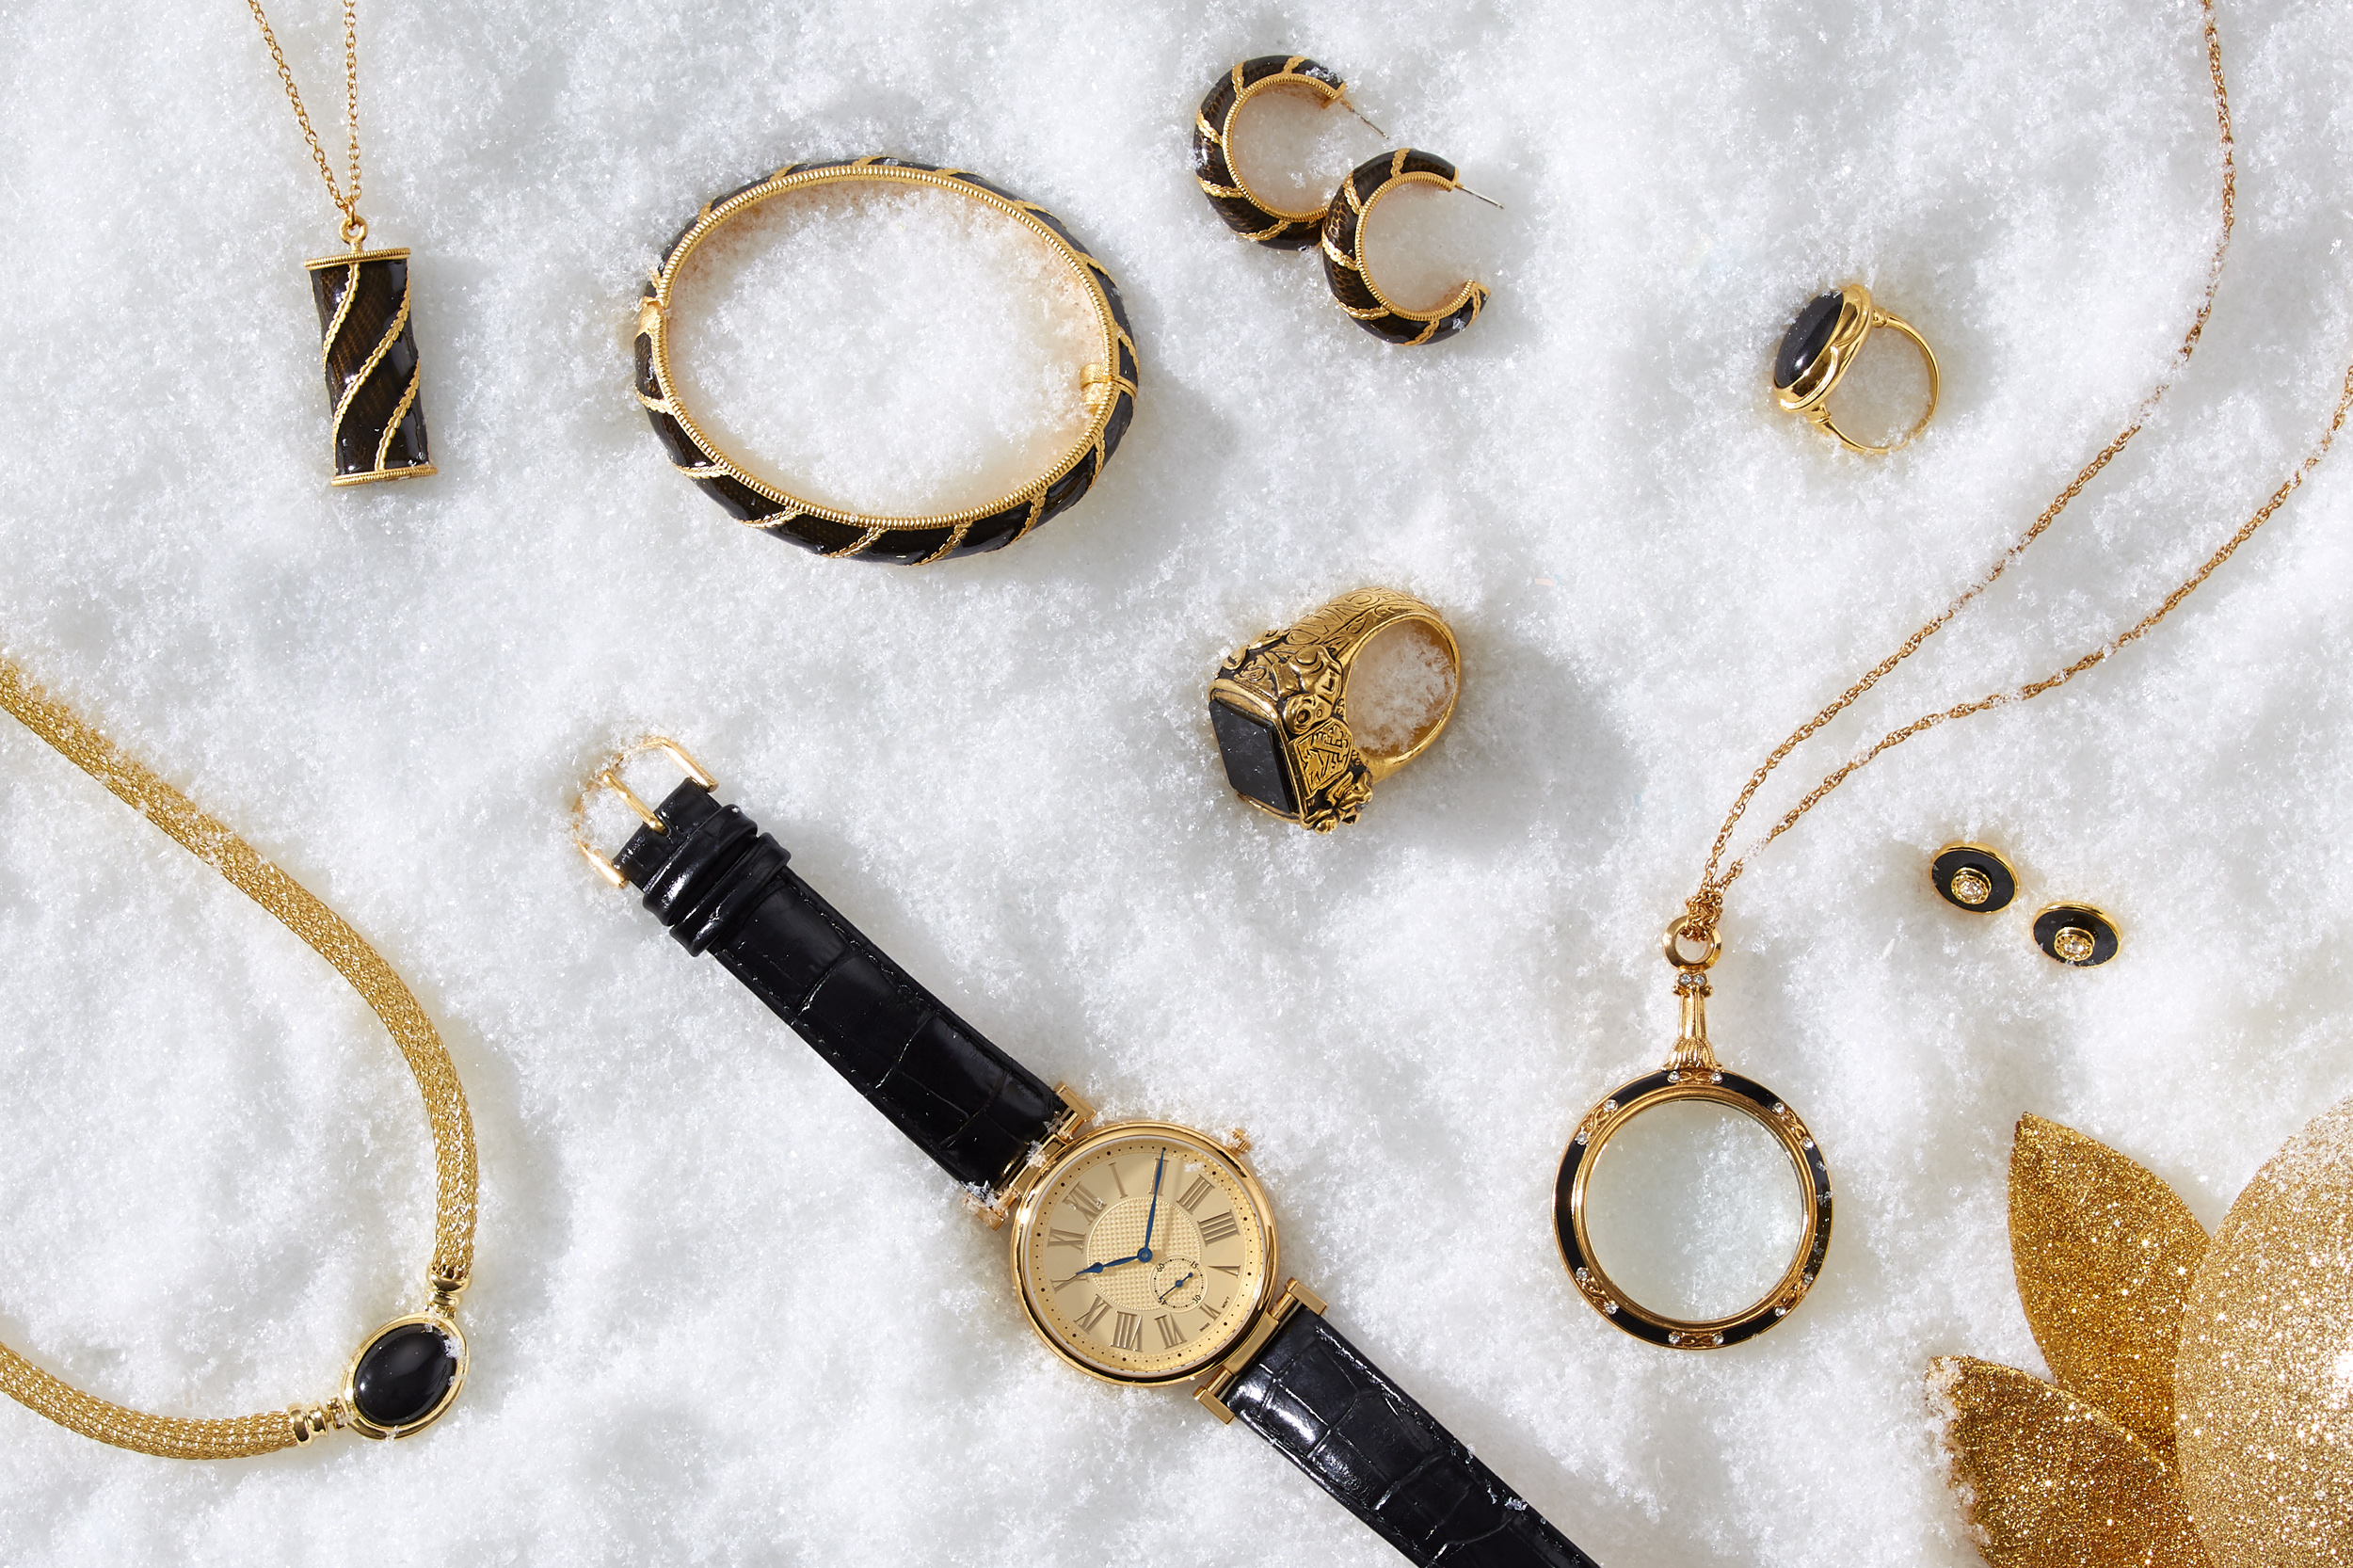 marketing still life photograph of black, gold and onyx jewelry including necklaces, earrings, rings, a bracelet, and a watch on snow